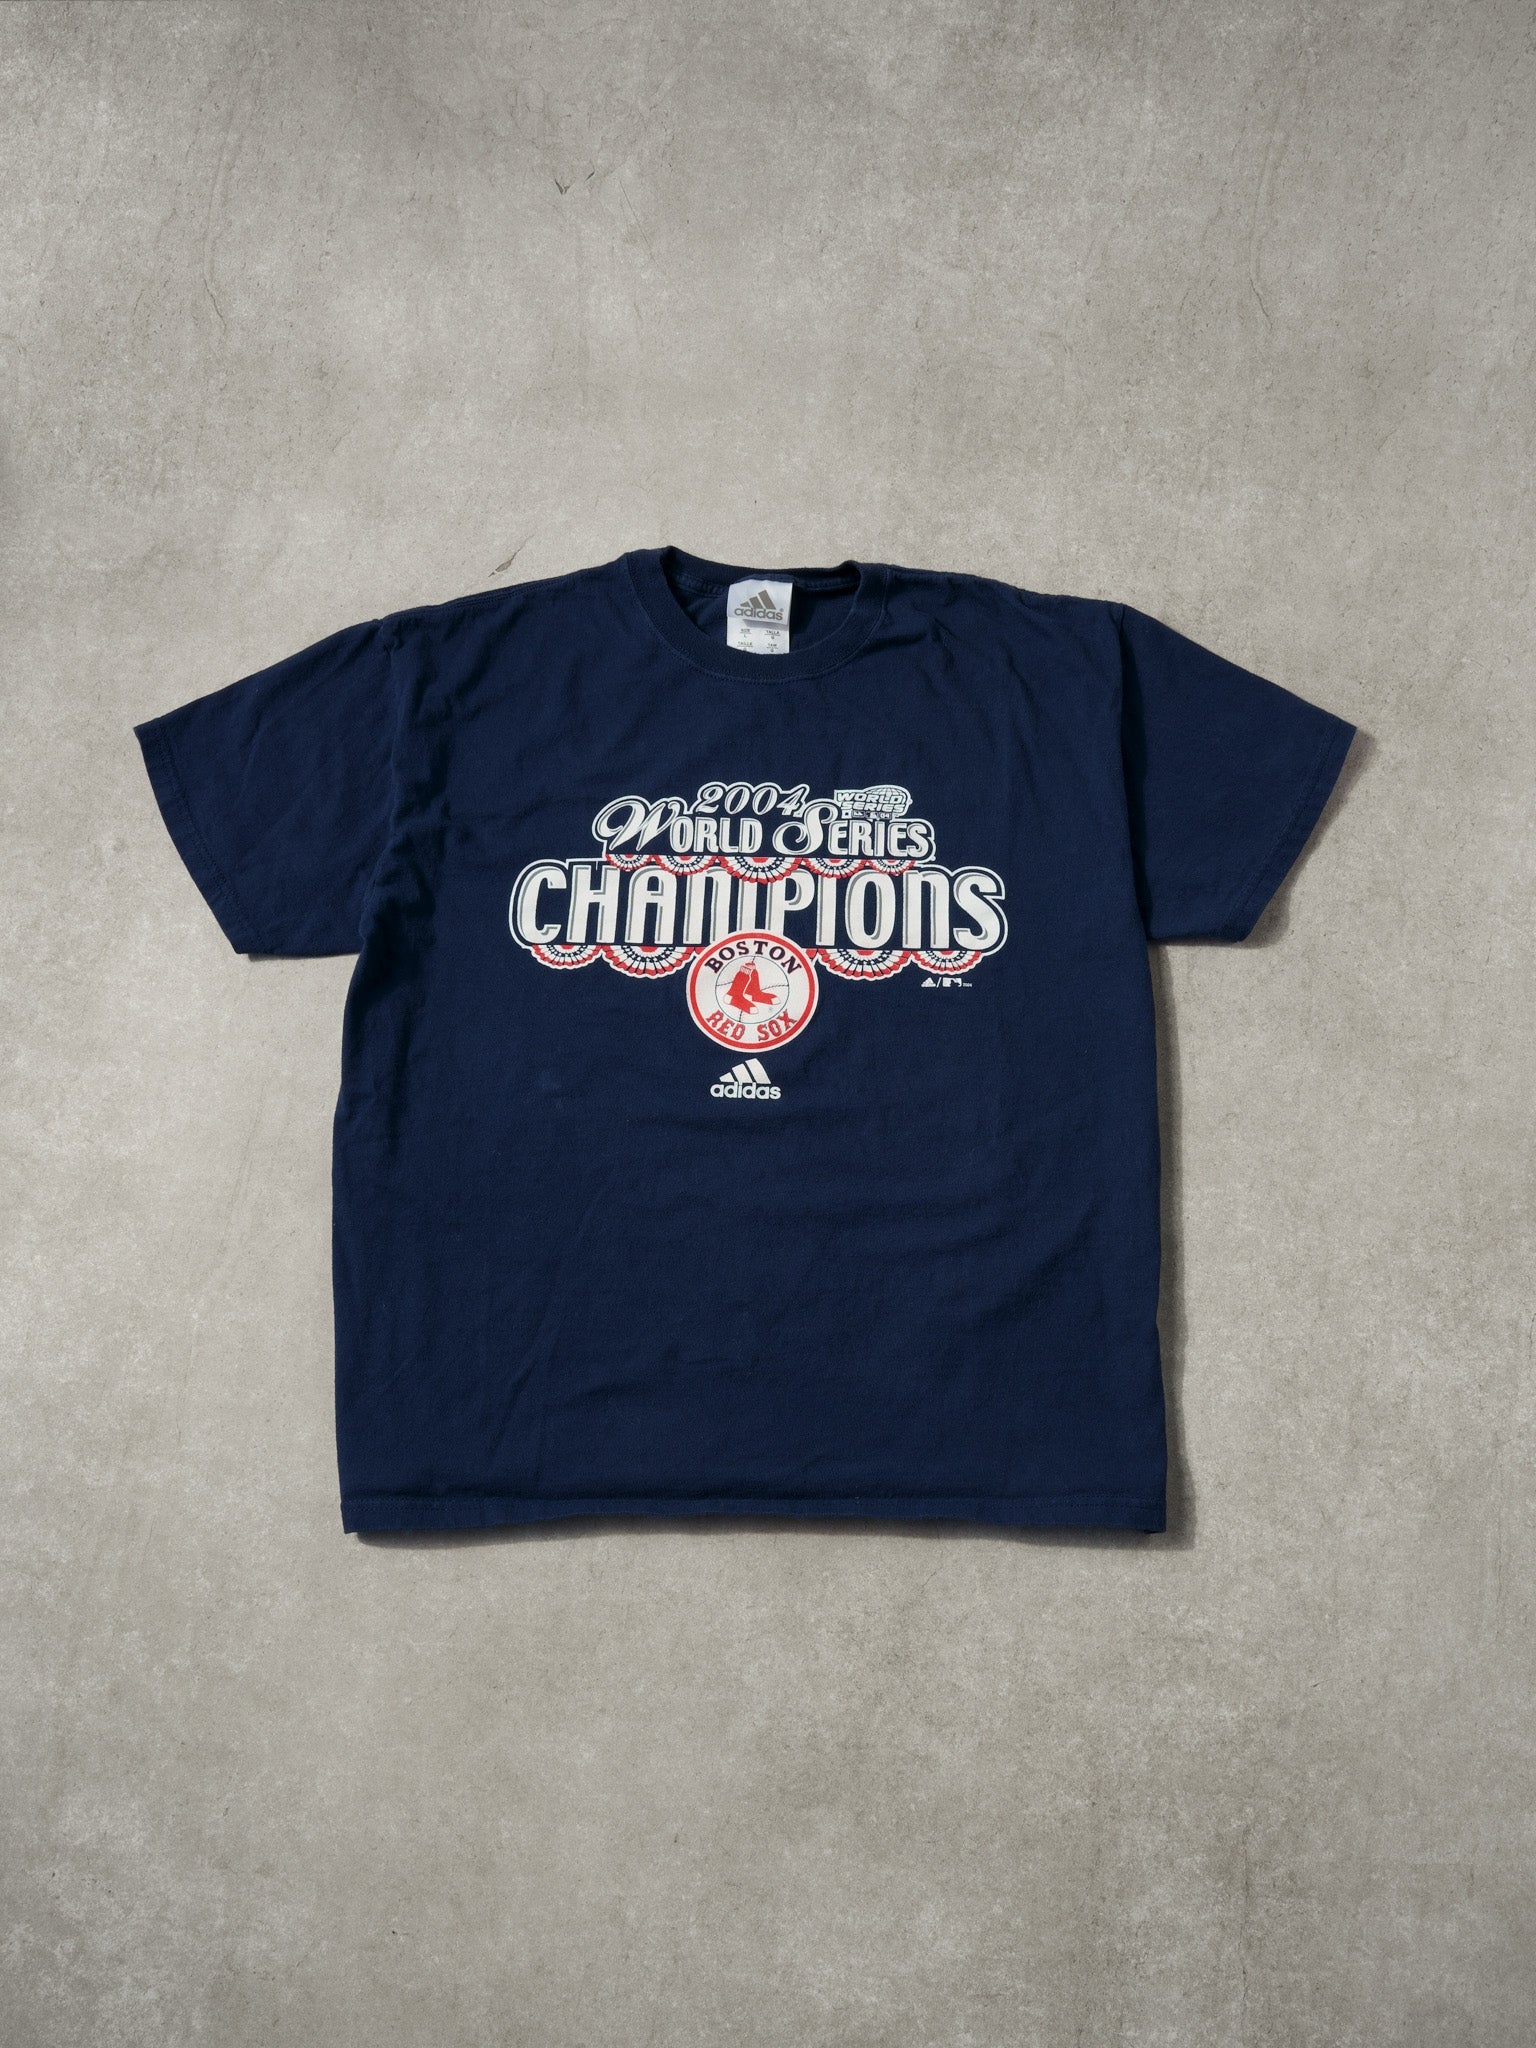 Vintage 04' Navy Blue Boston Red Sox World Series Champions Graphic Tee (M)